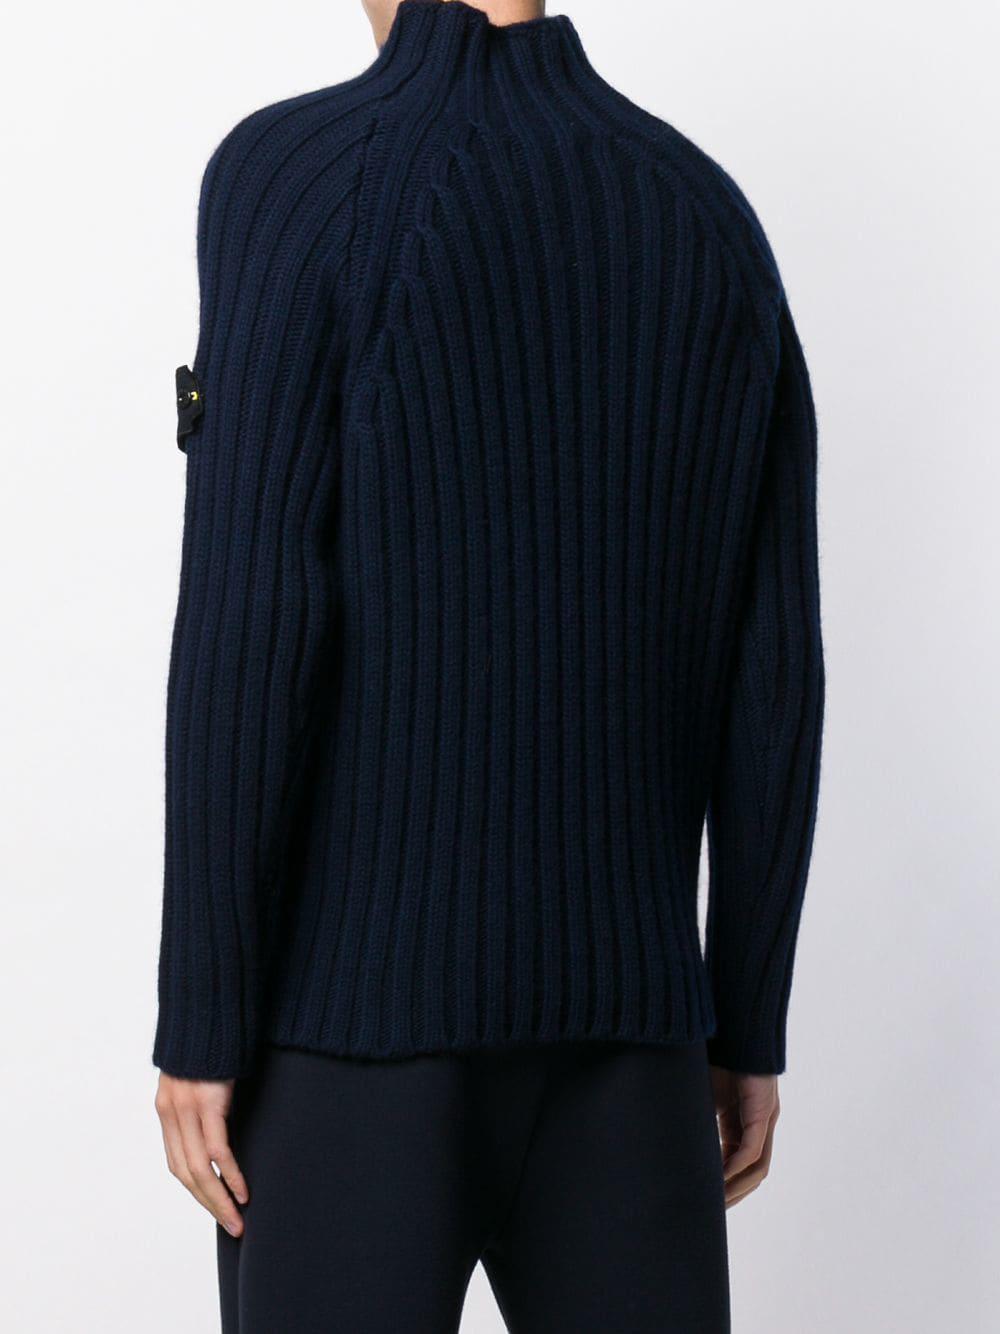 Lyst - Stone Island Chunky Knit Jumper in Blue for Men